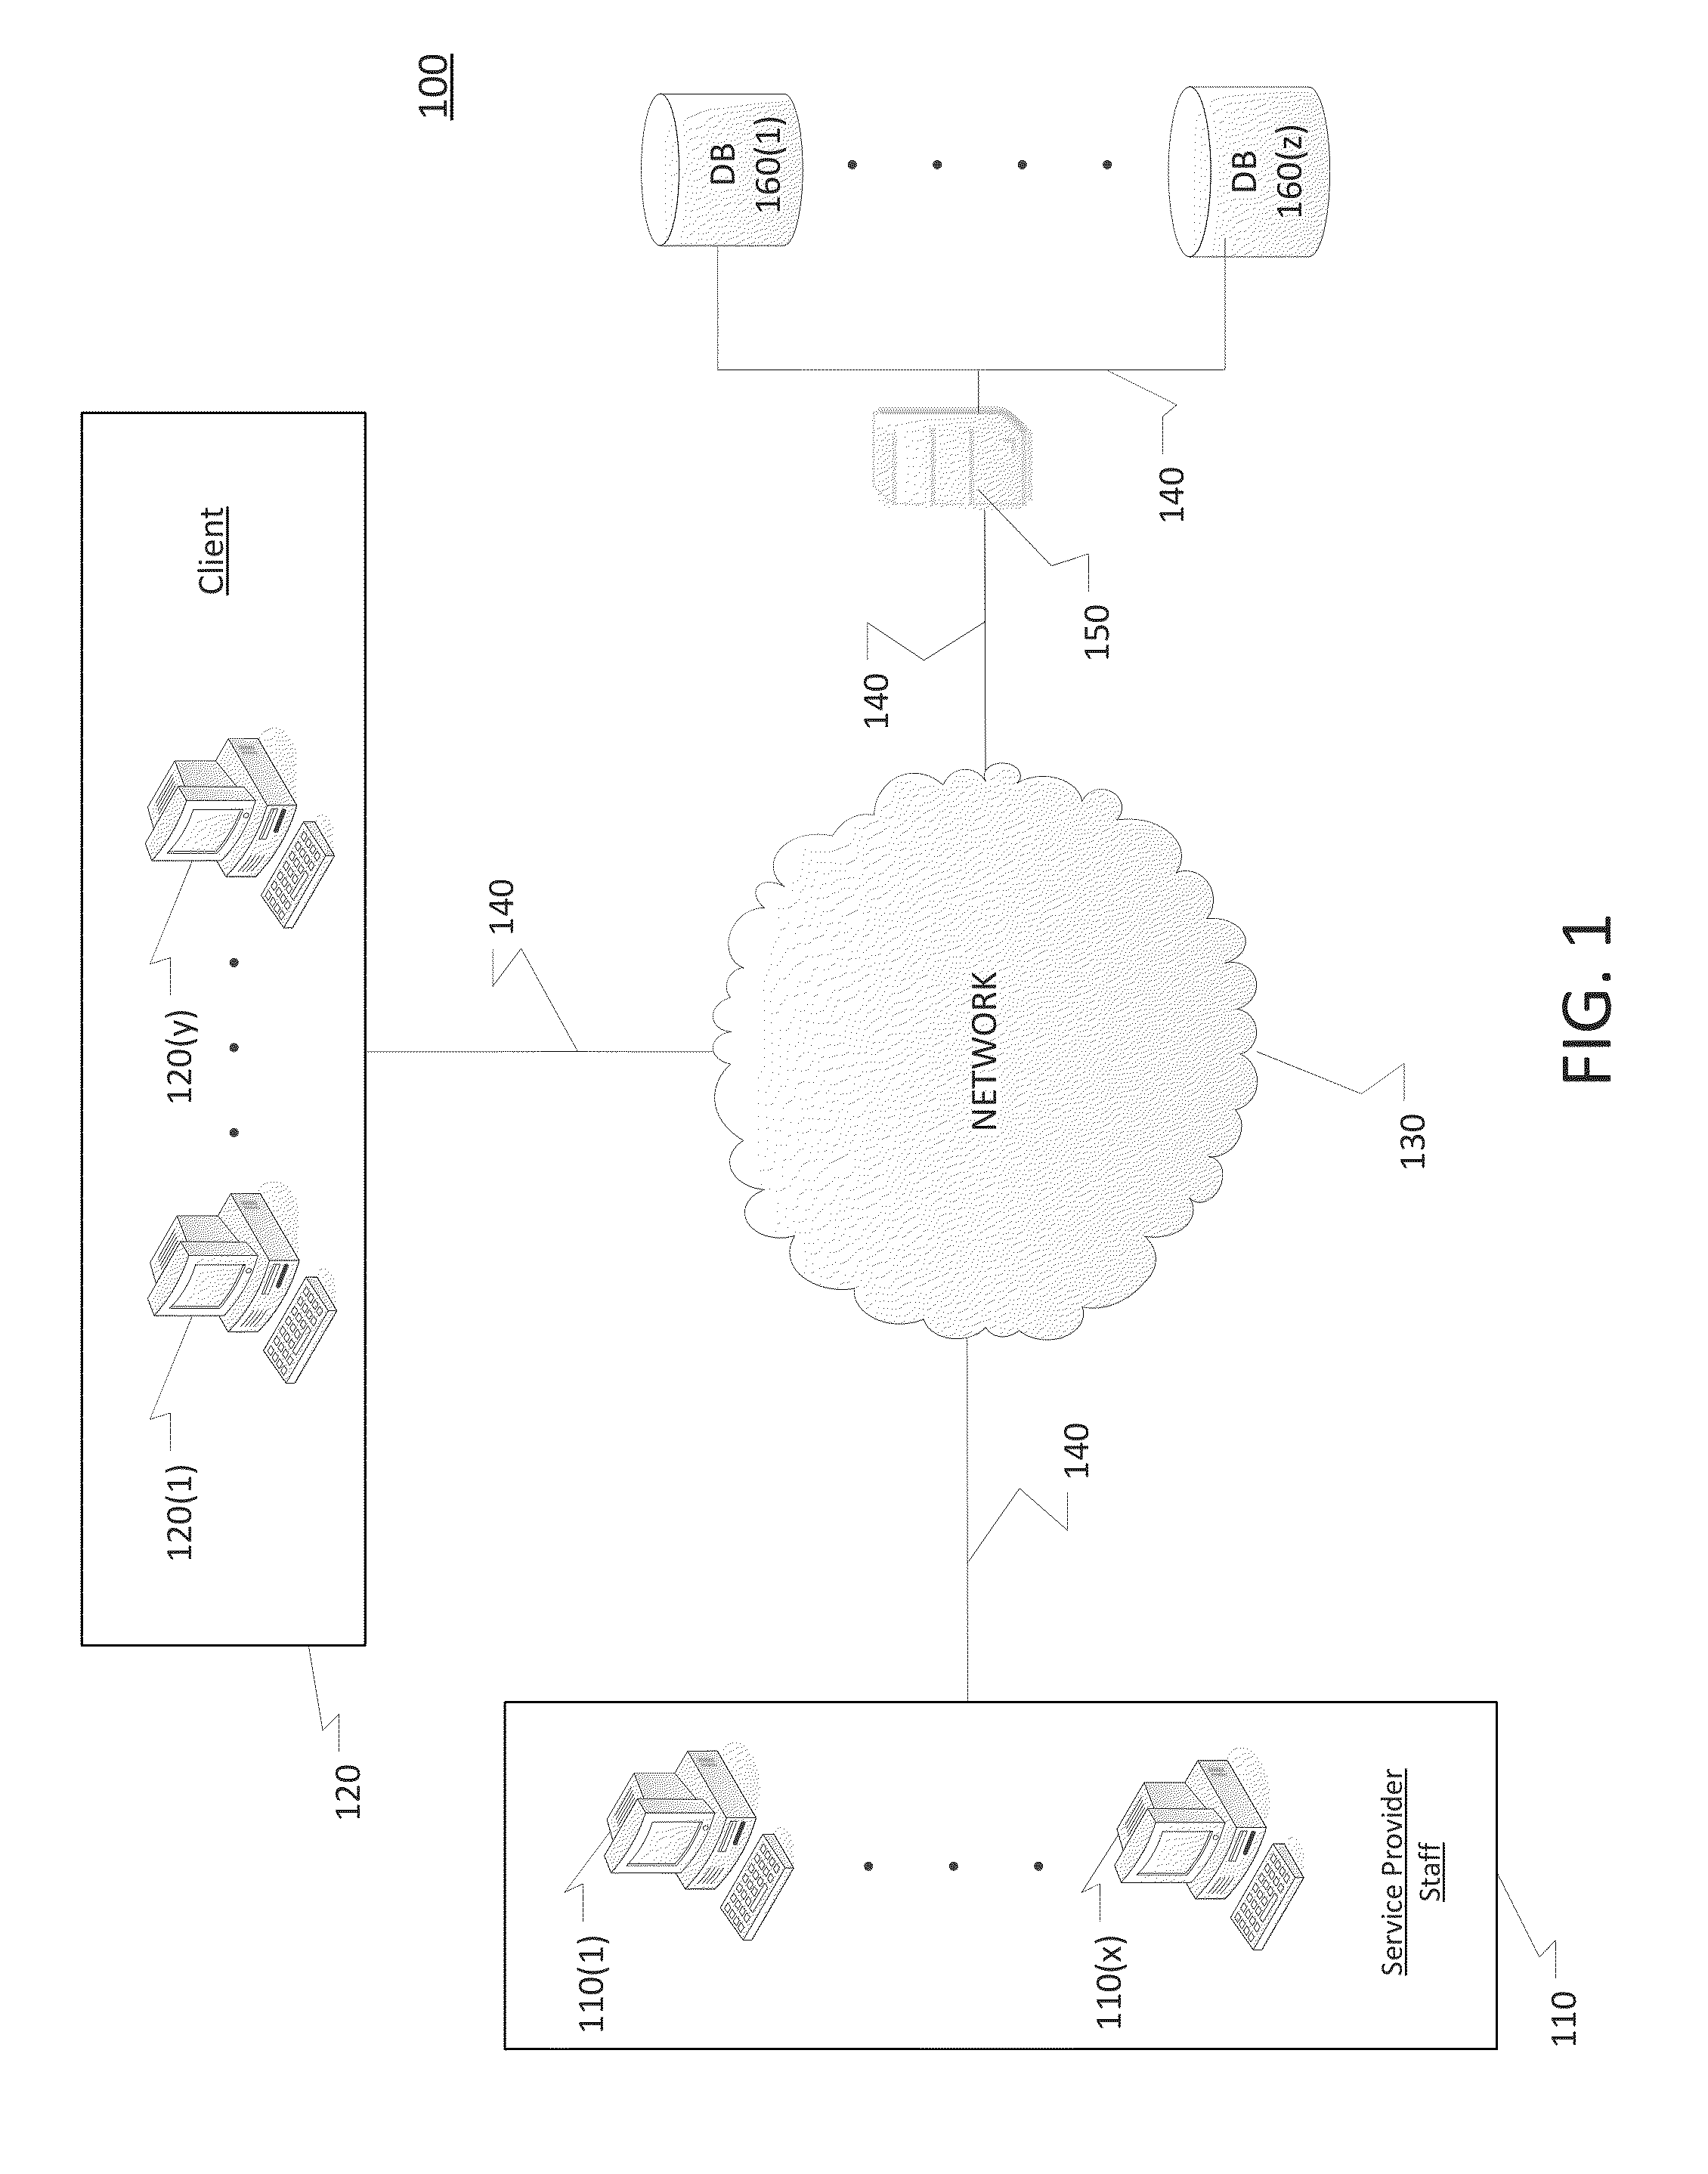 System and method for analyzing and predicting the impactof social programs